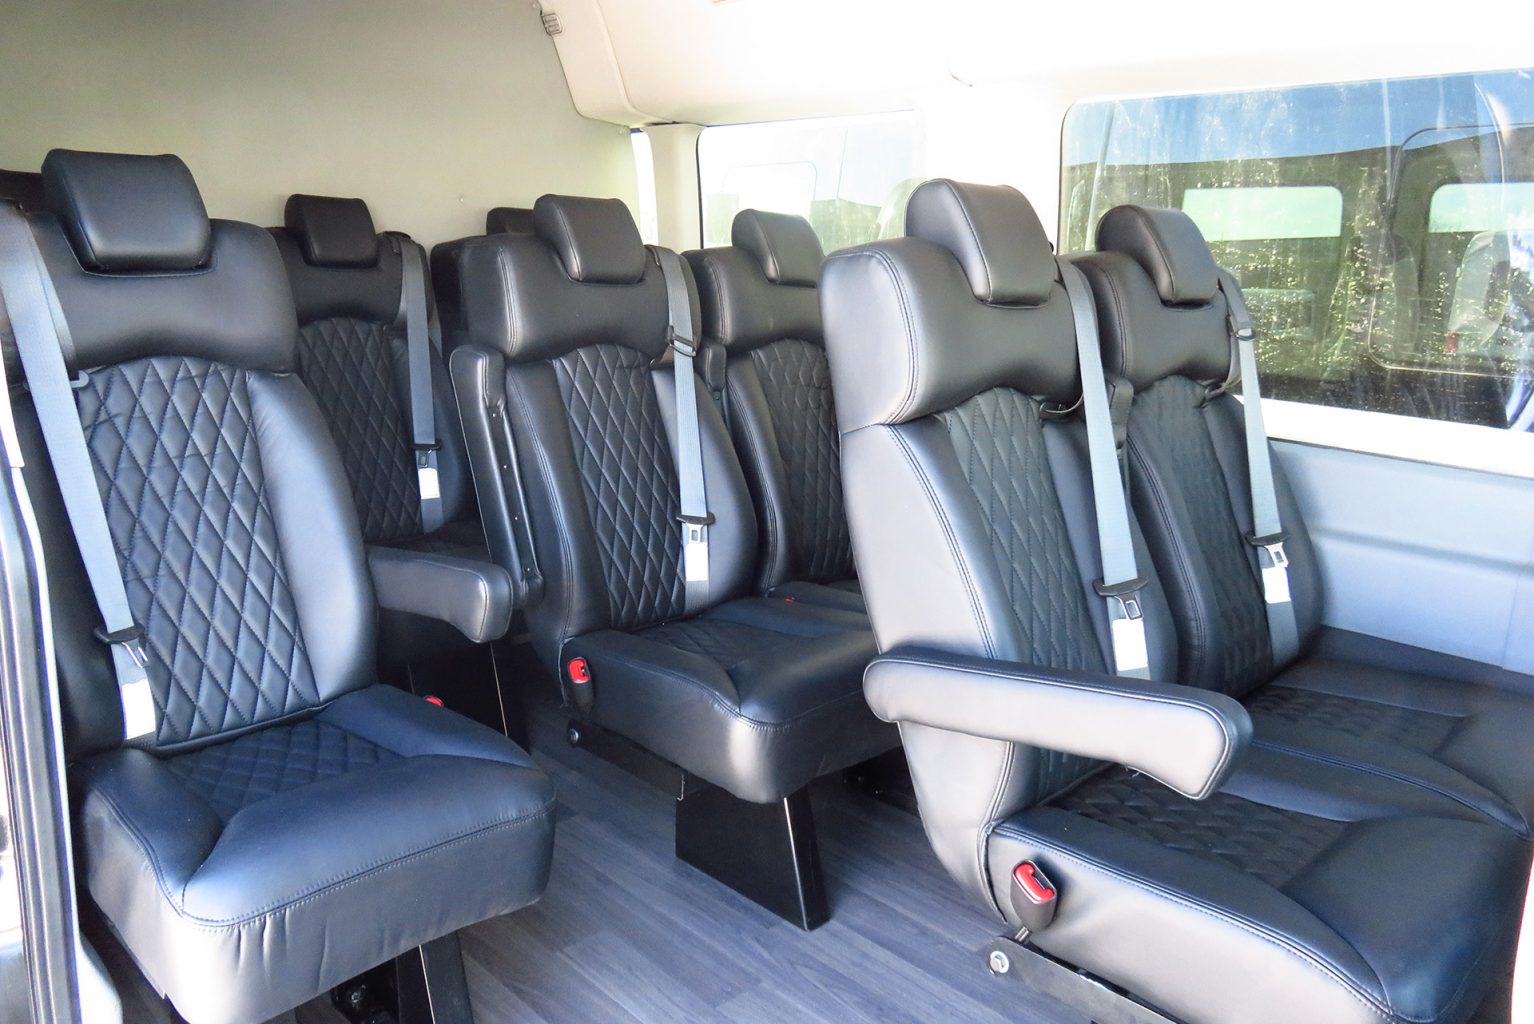 Van with stitched leather interior